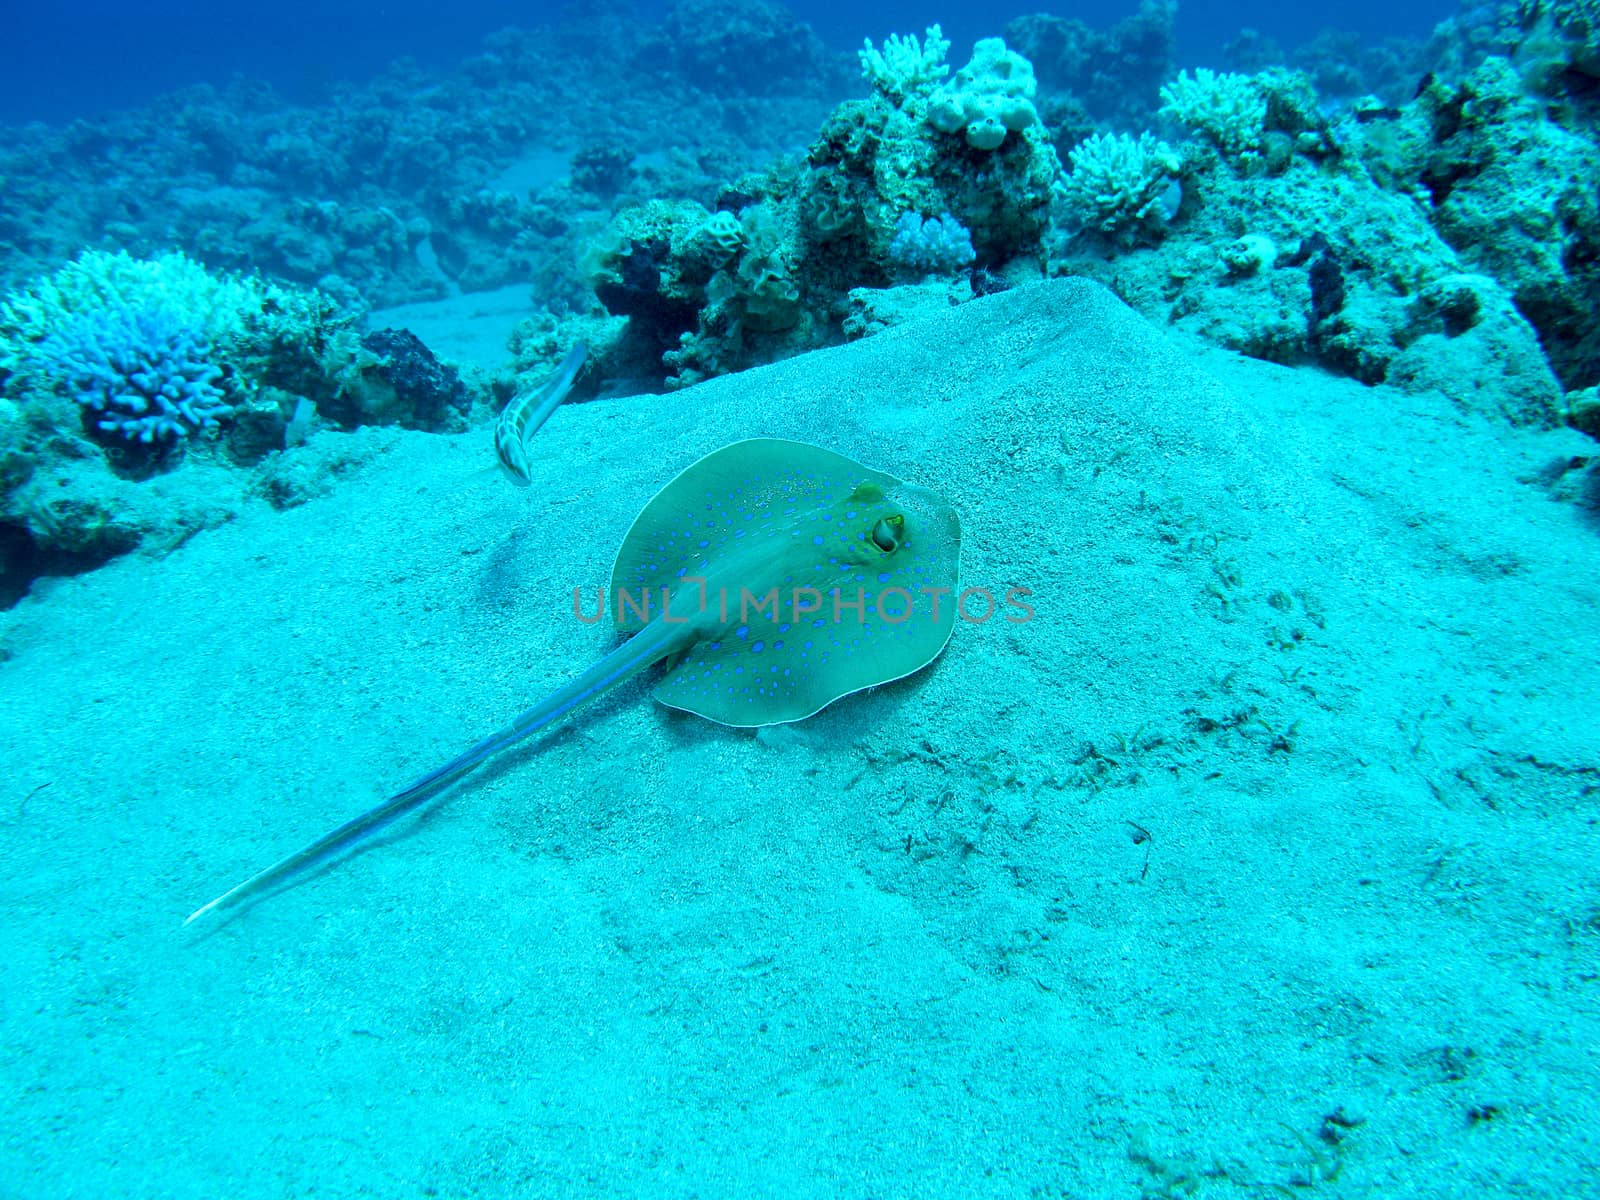 Bluespotted ray (Taeniura lymma) in tropical sea, underwater by mychadre77